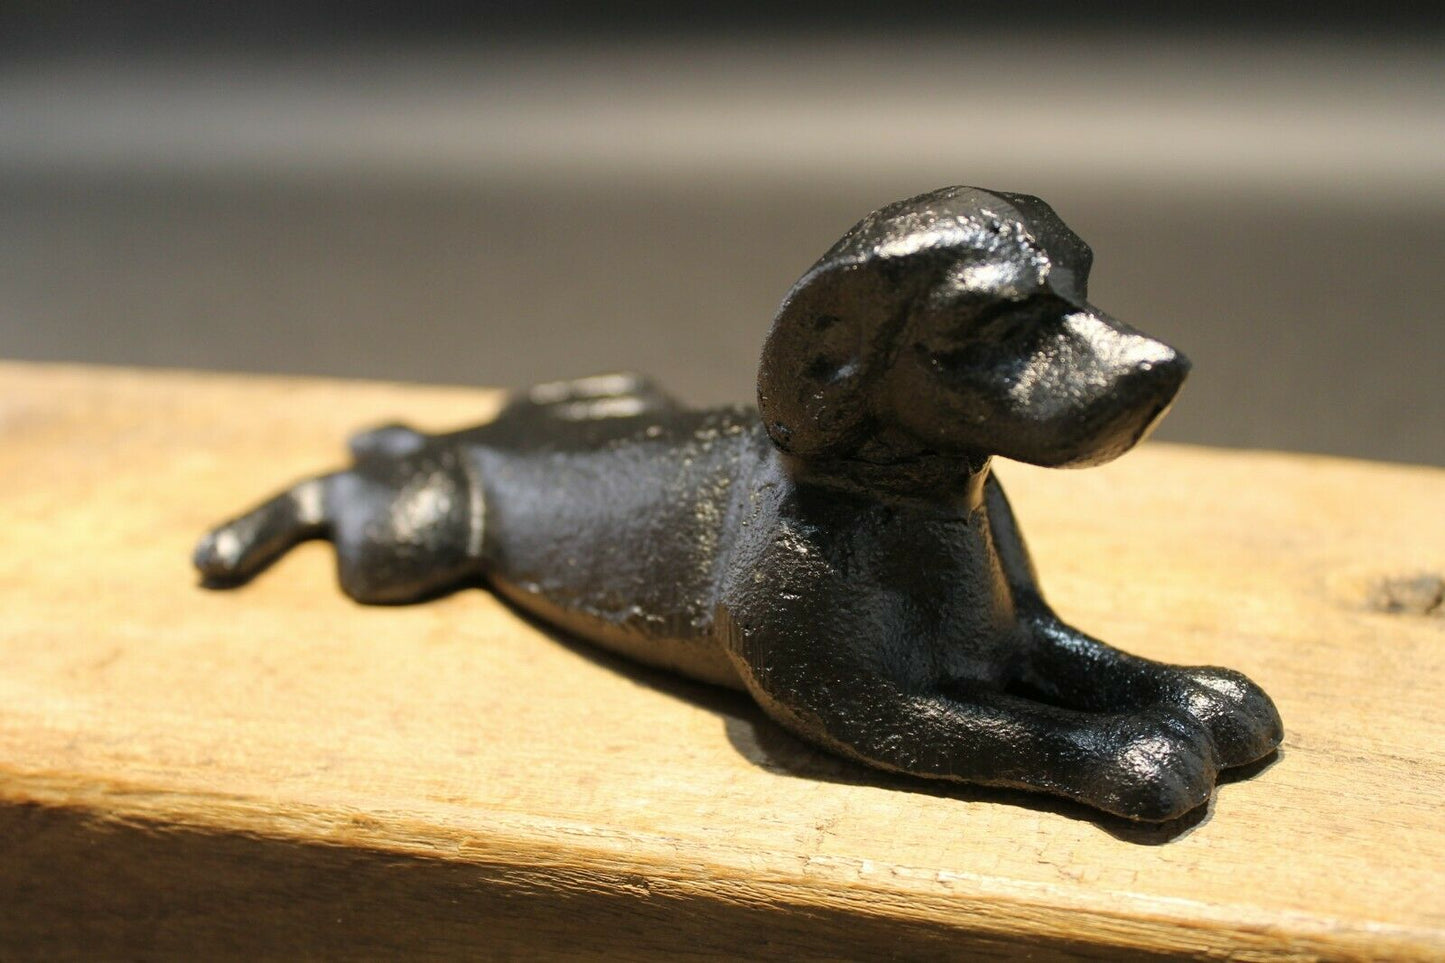 Antique Vintage Style Cast Iron Door Stop Dog Wedge Black - Early Home Decor